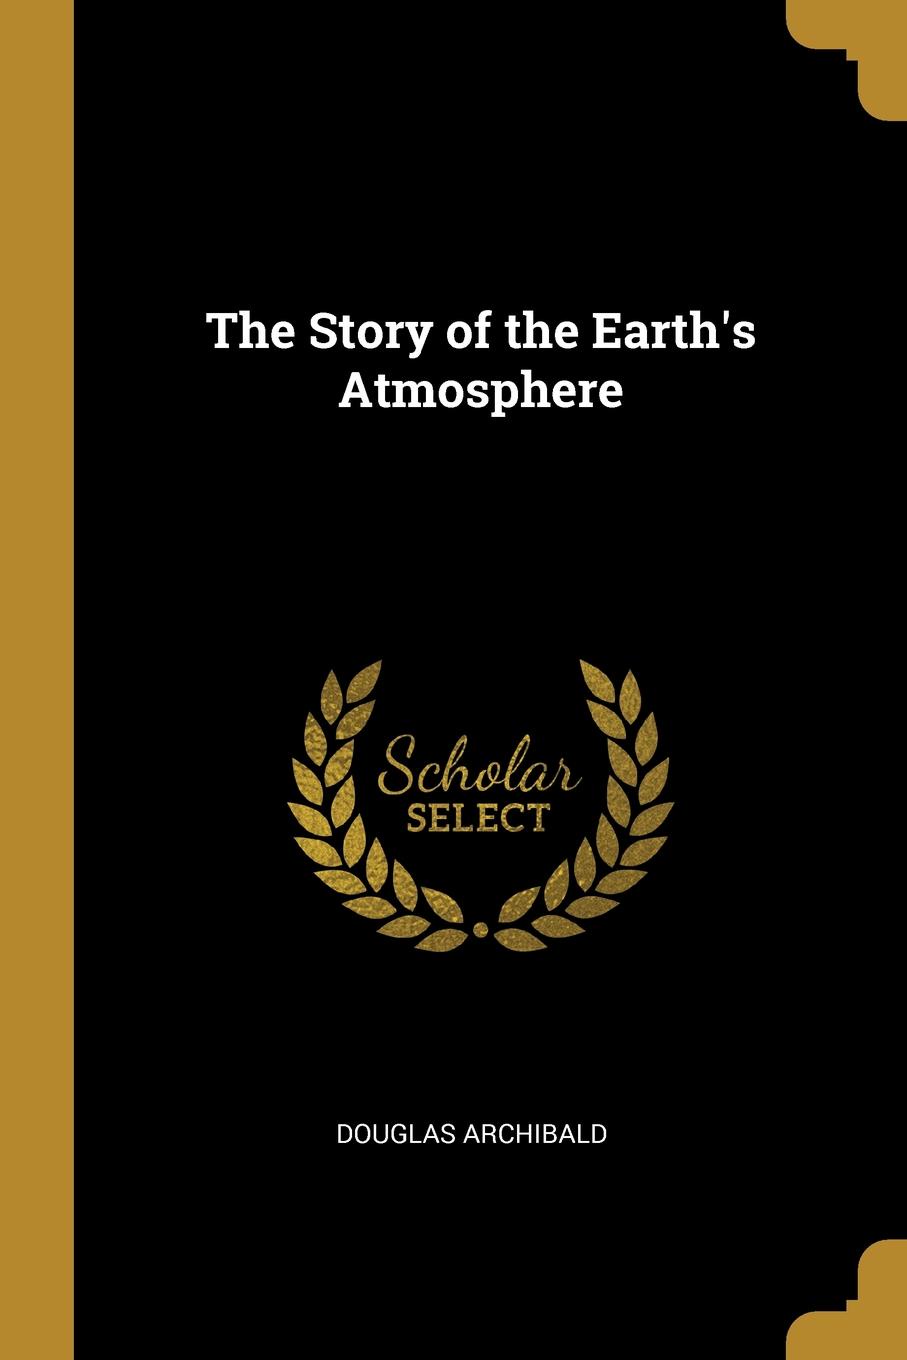 The Story of the Earth.s Atmosphere